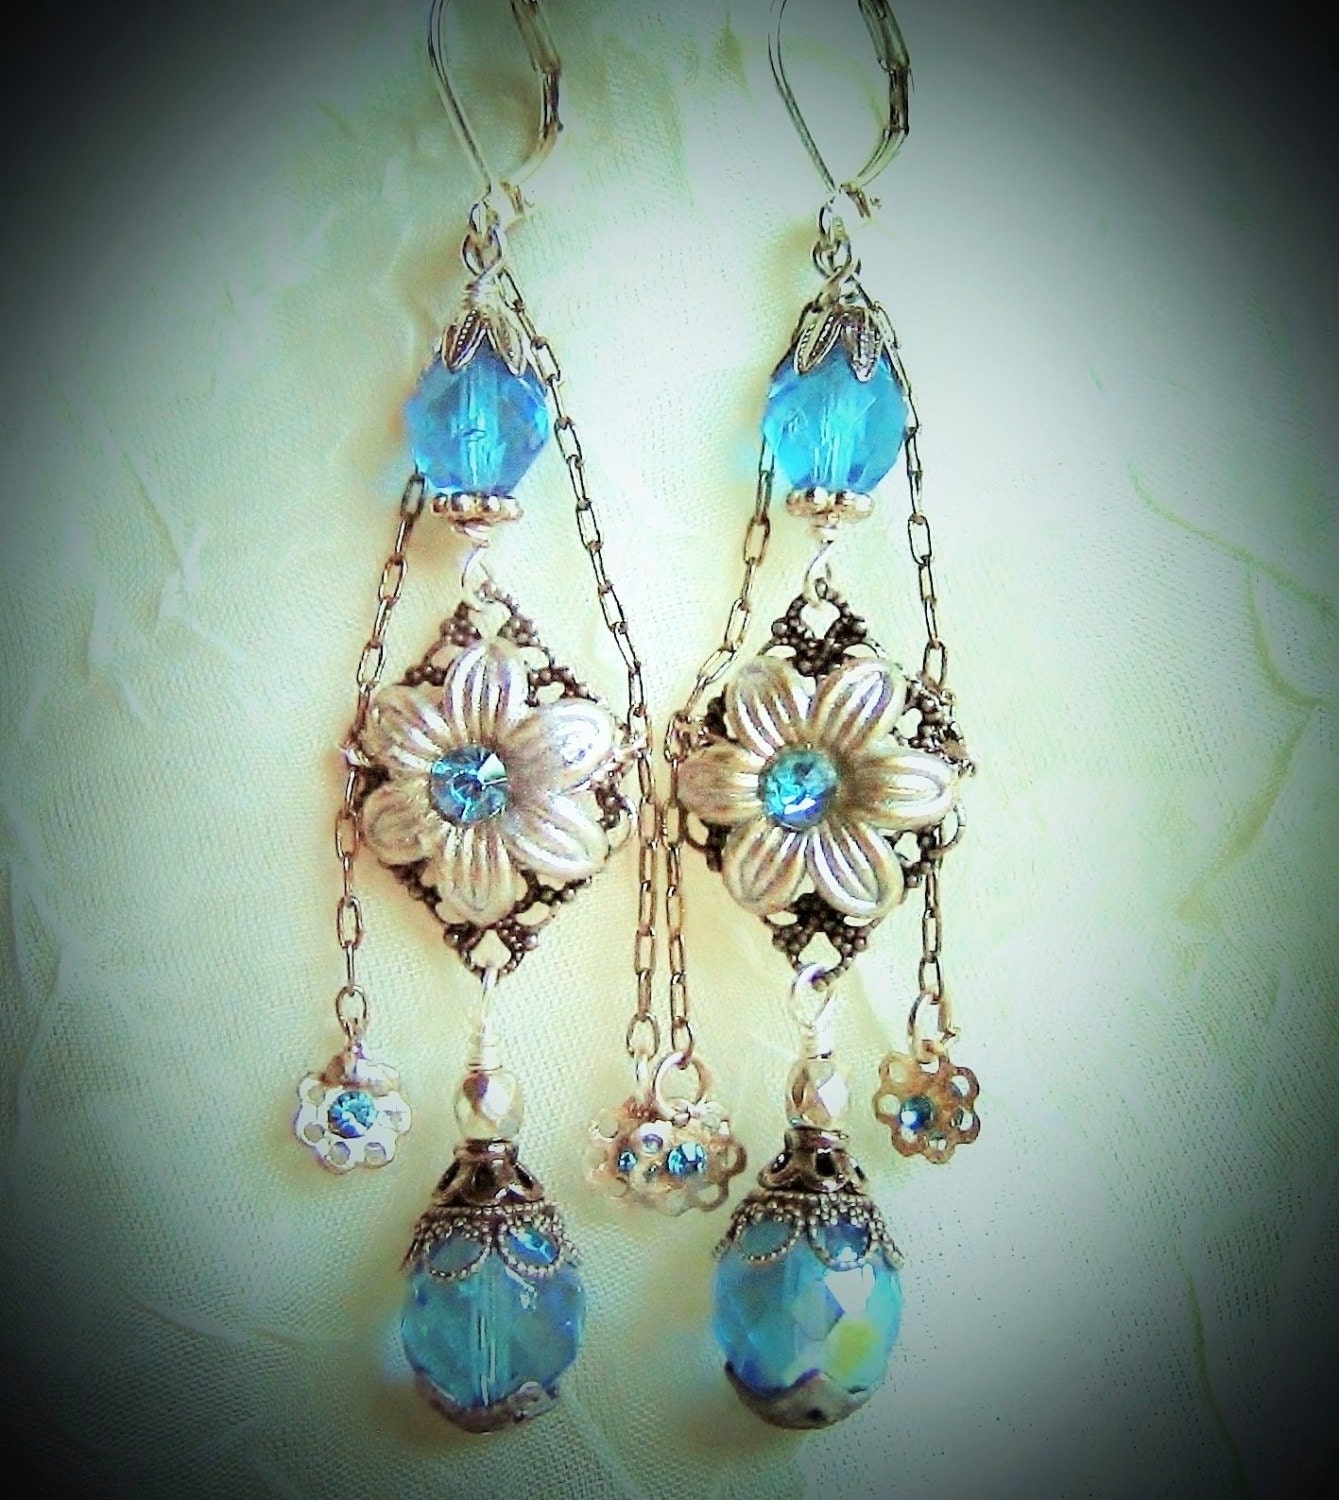 Earrings, Antiqued Silver With Aqua Czech Crystal Beads, Swarovski Chatons, Statement Earrings, Steampunk, Hendrika